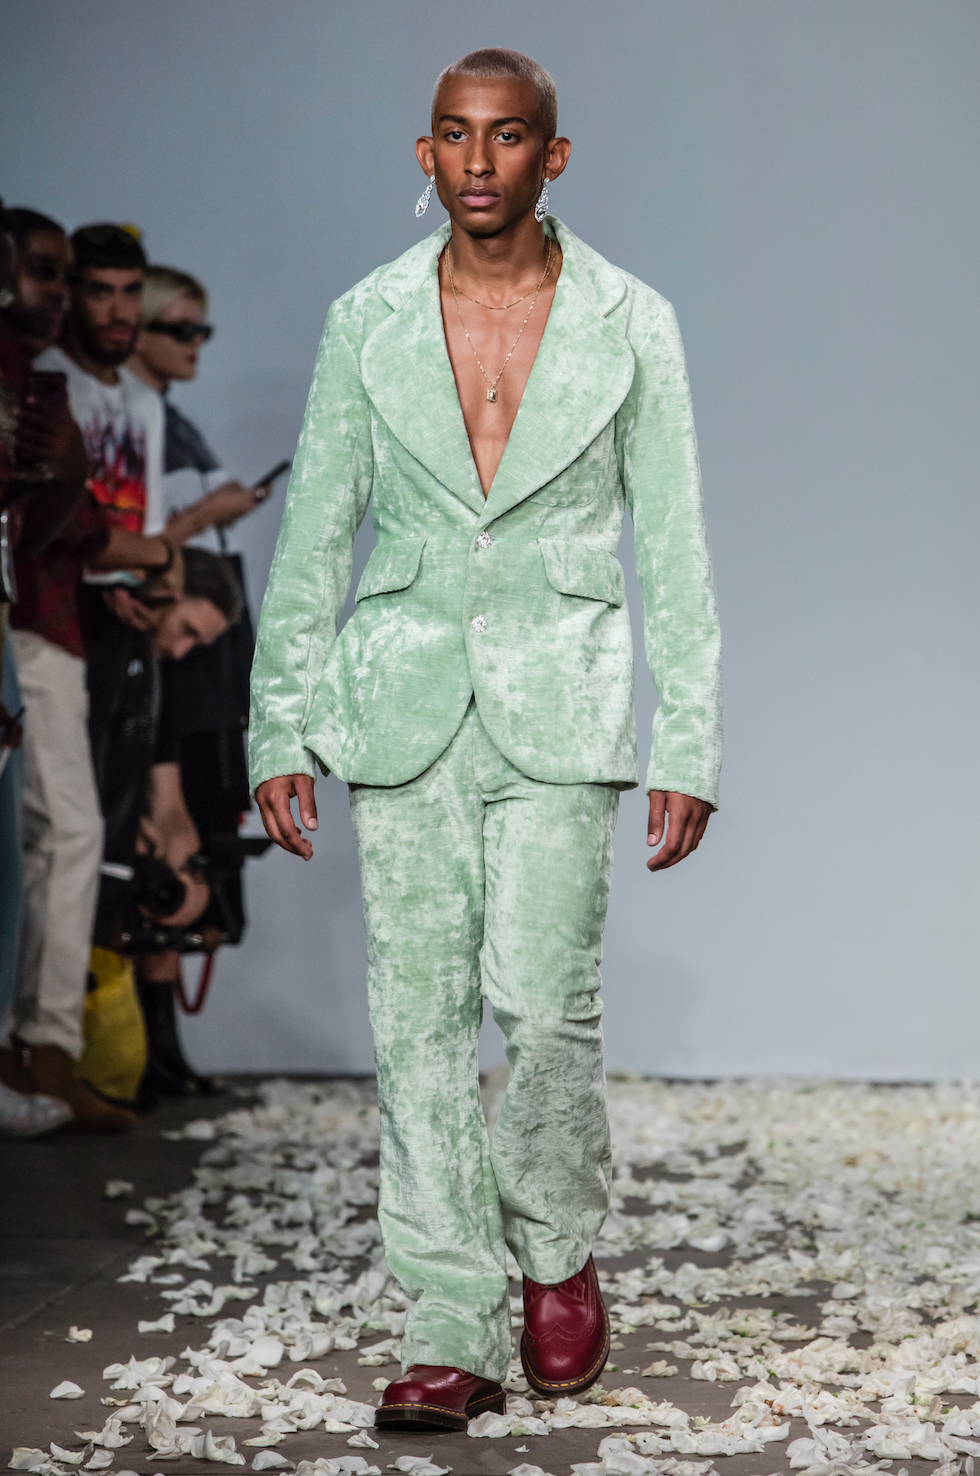 Our Top 5 Men’s Fashion Week Moments That You Need To Know
